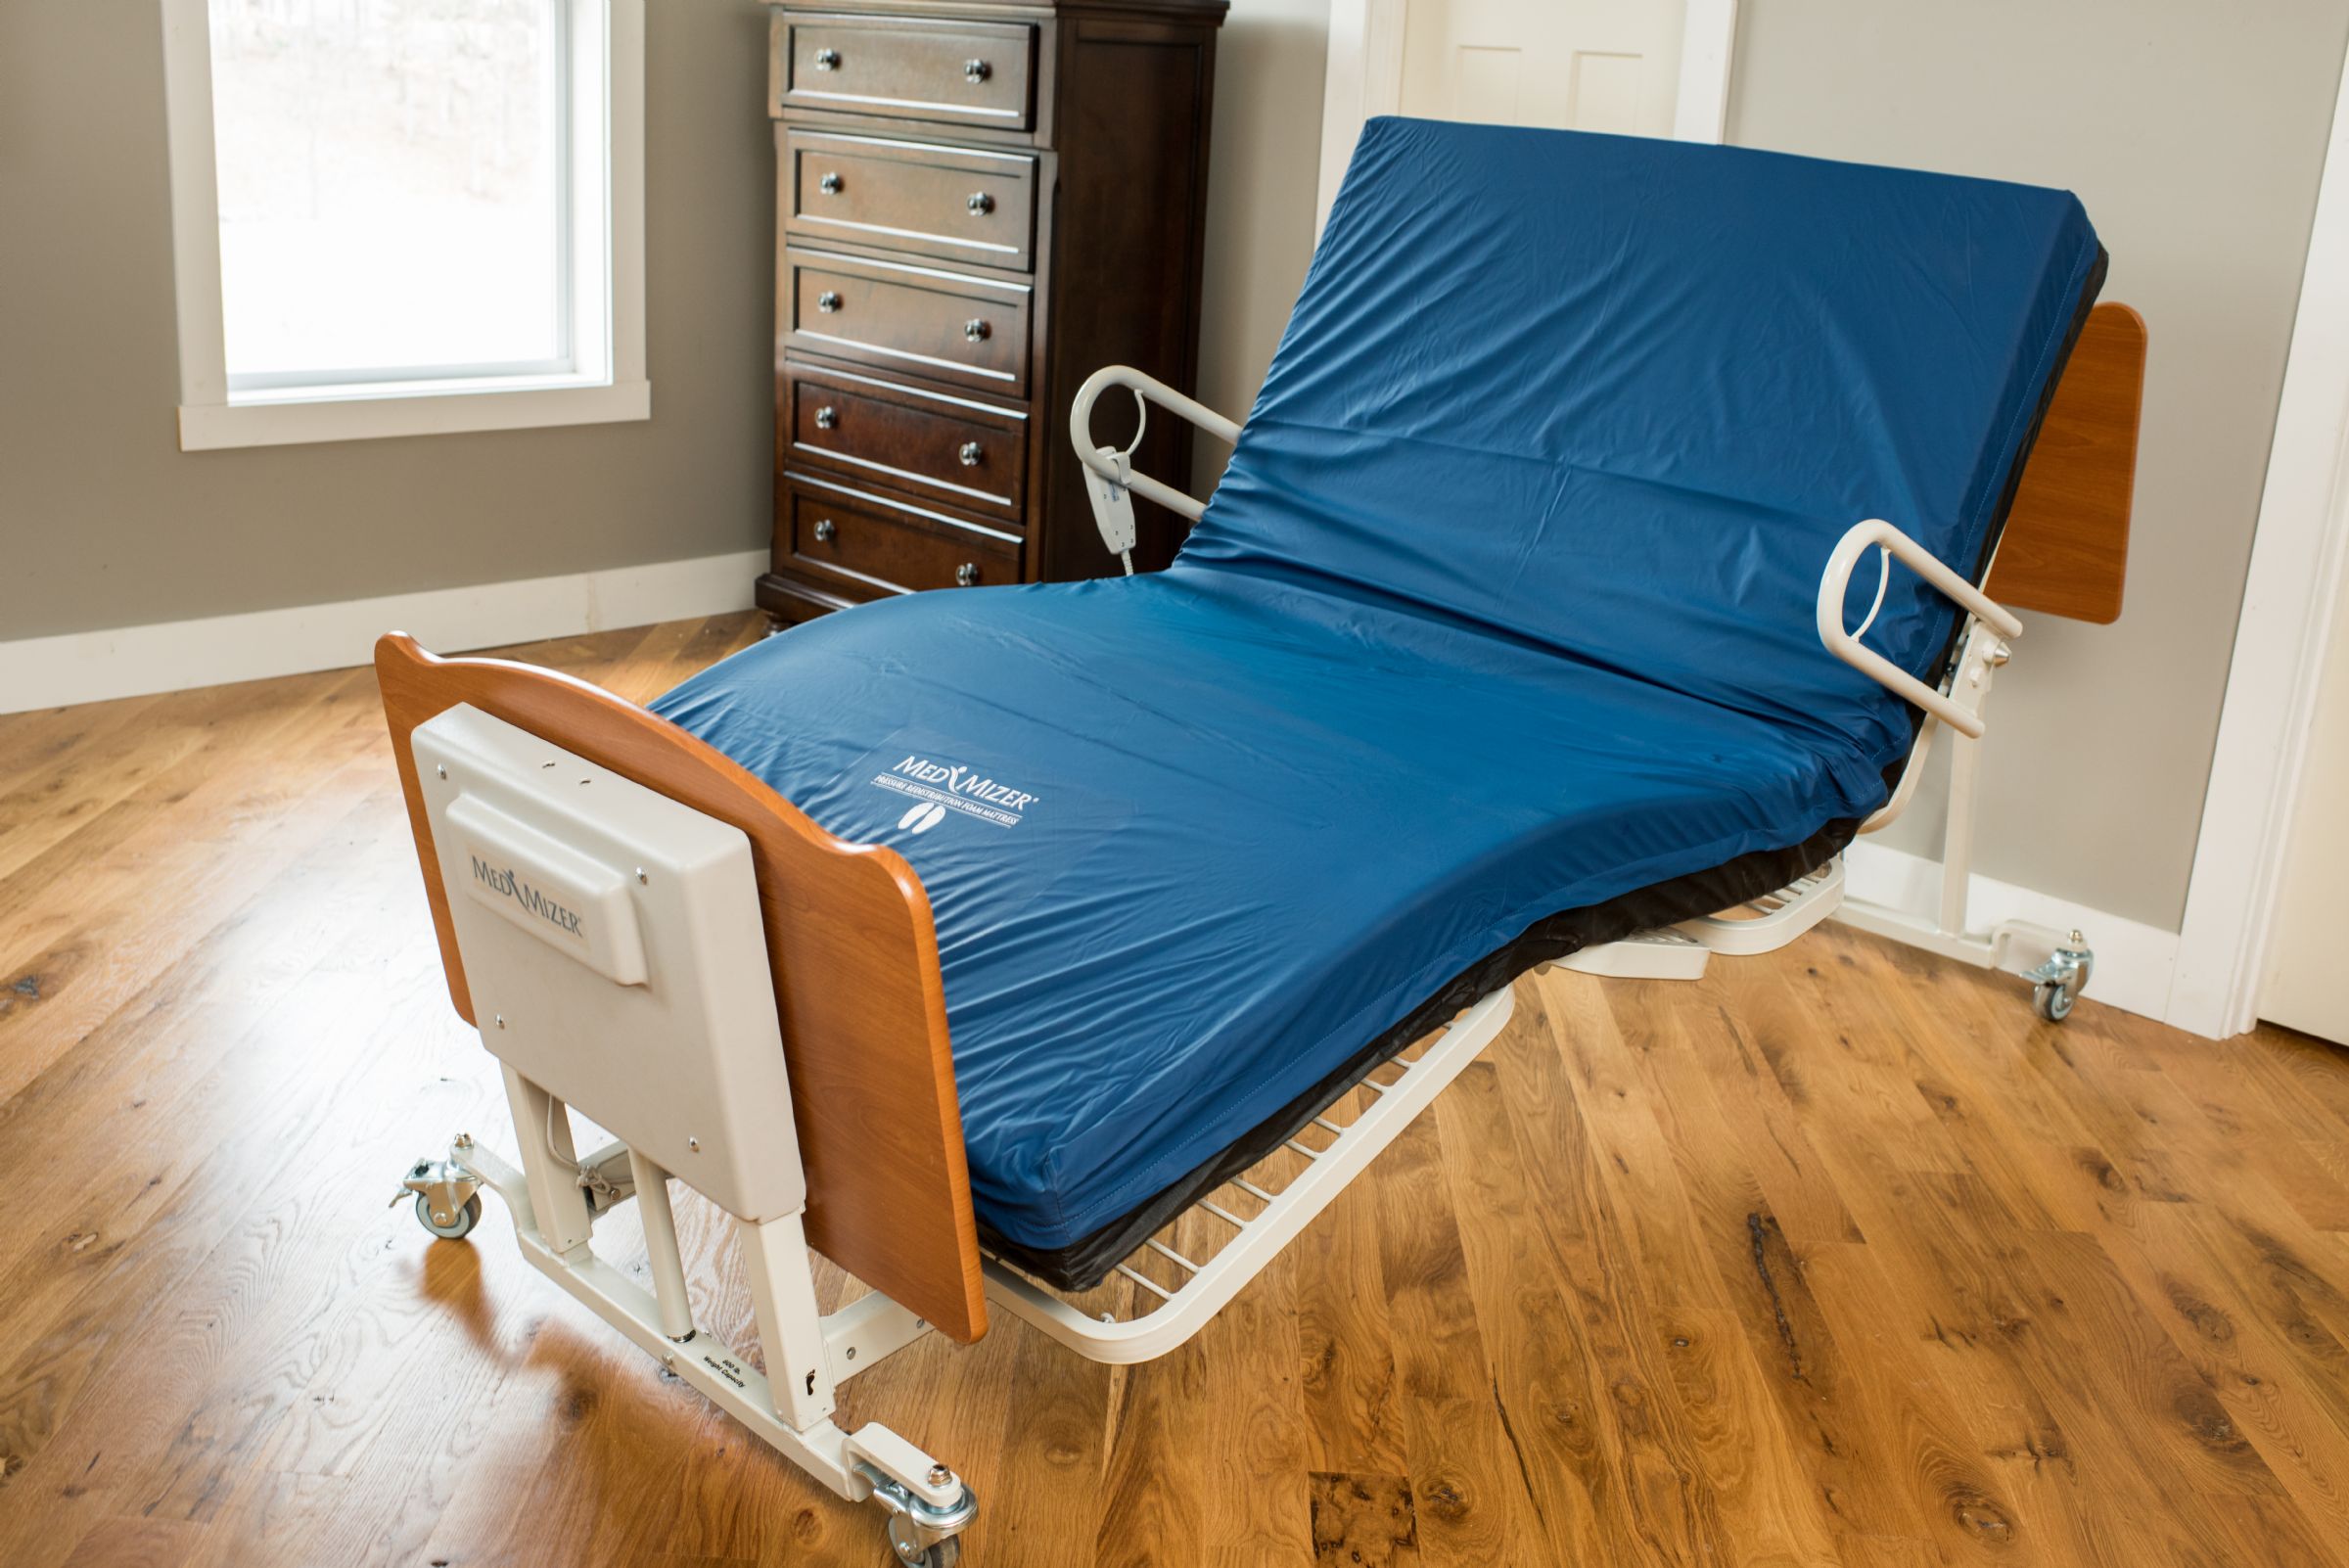 bariatric hospital bed with inflatable mattress